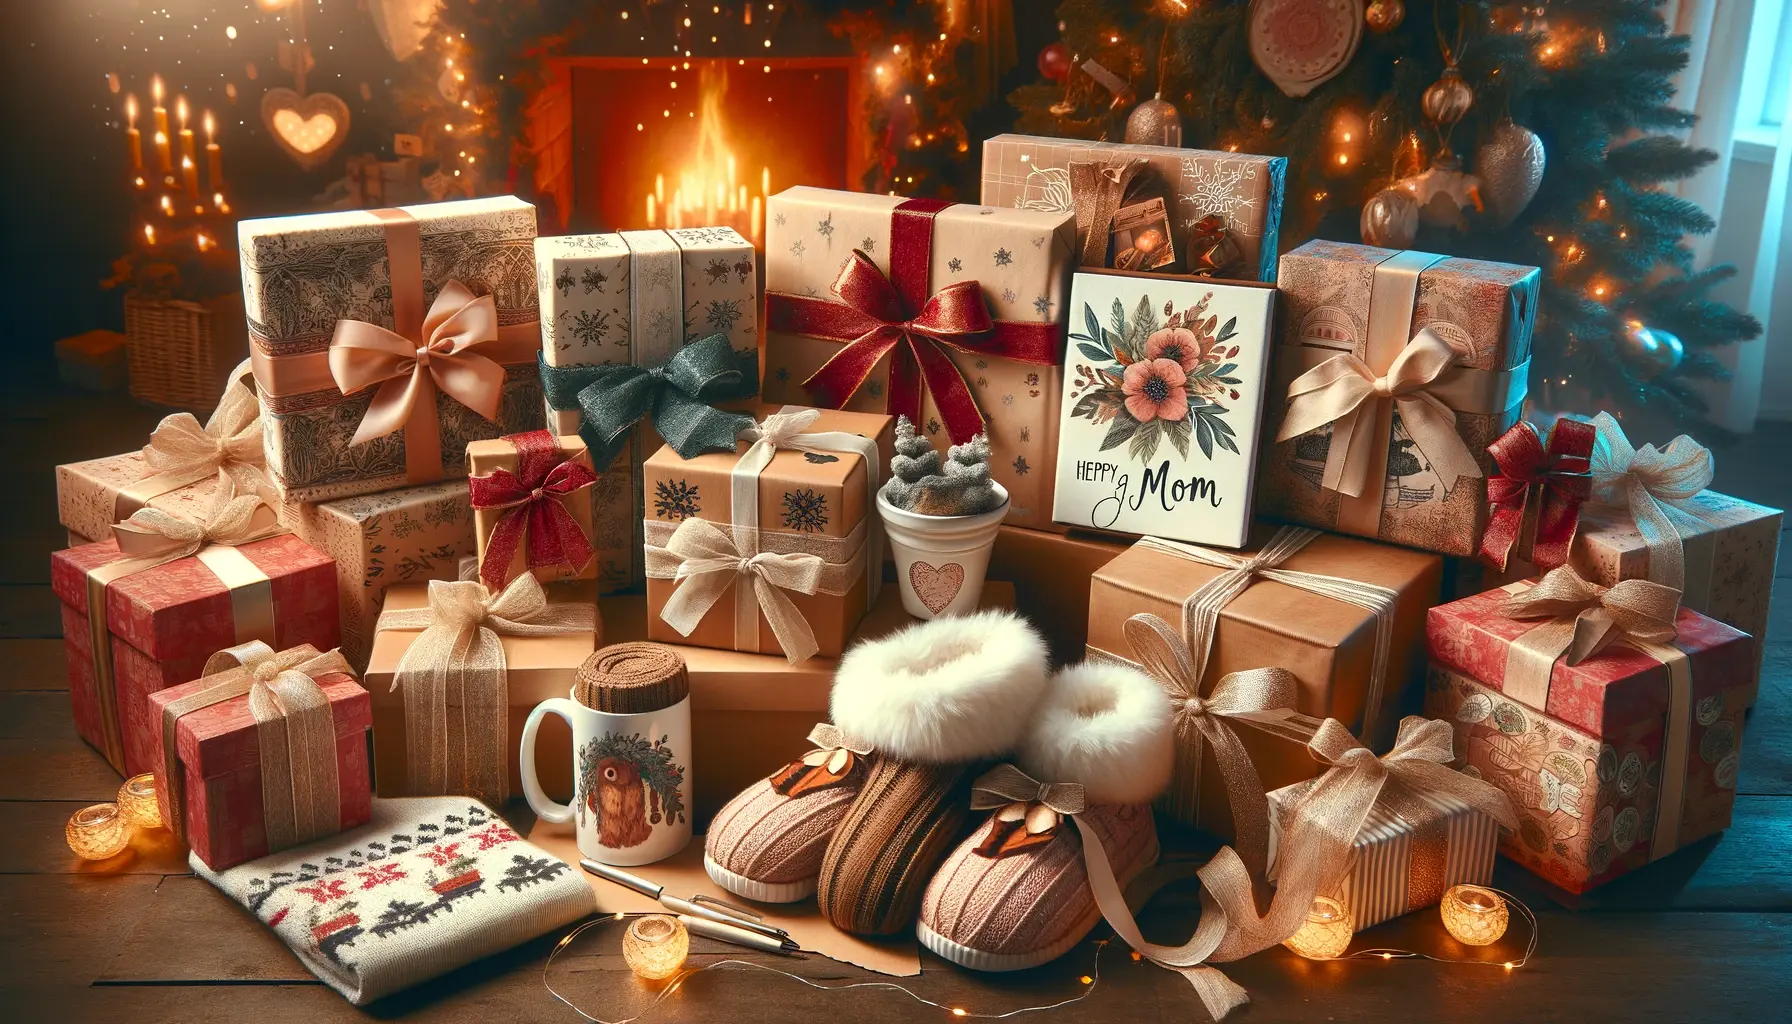 Top 12 Last-Minute Christmas Gift Ideas for Moms